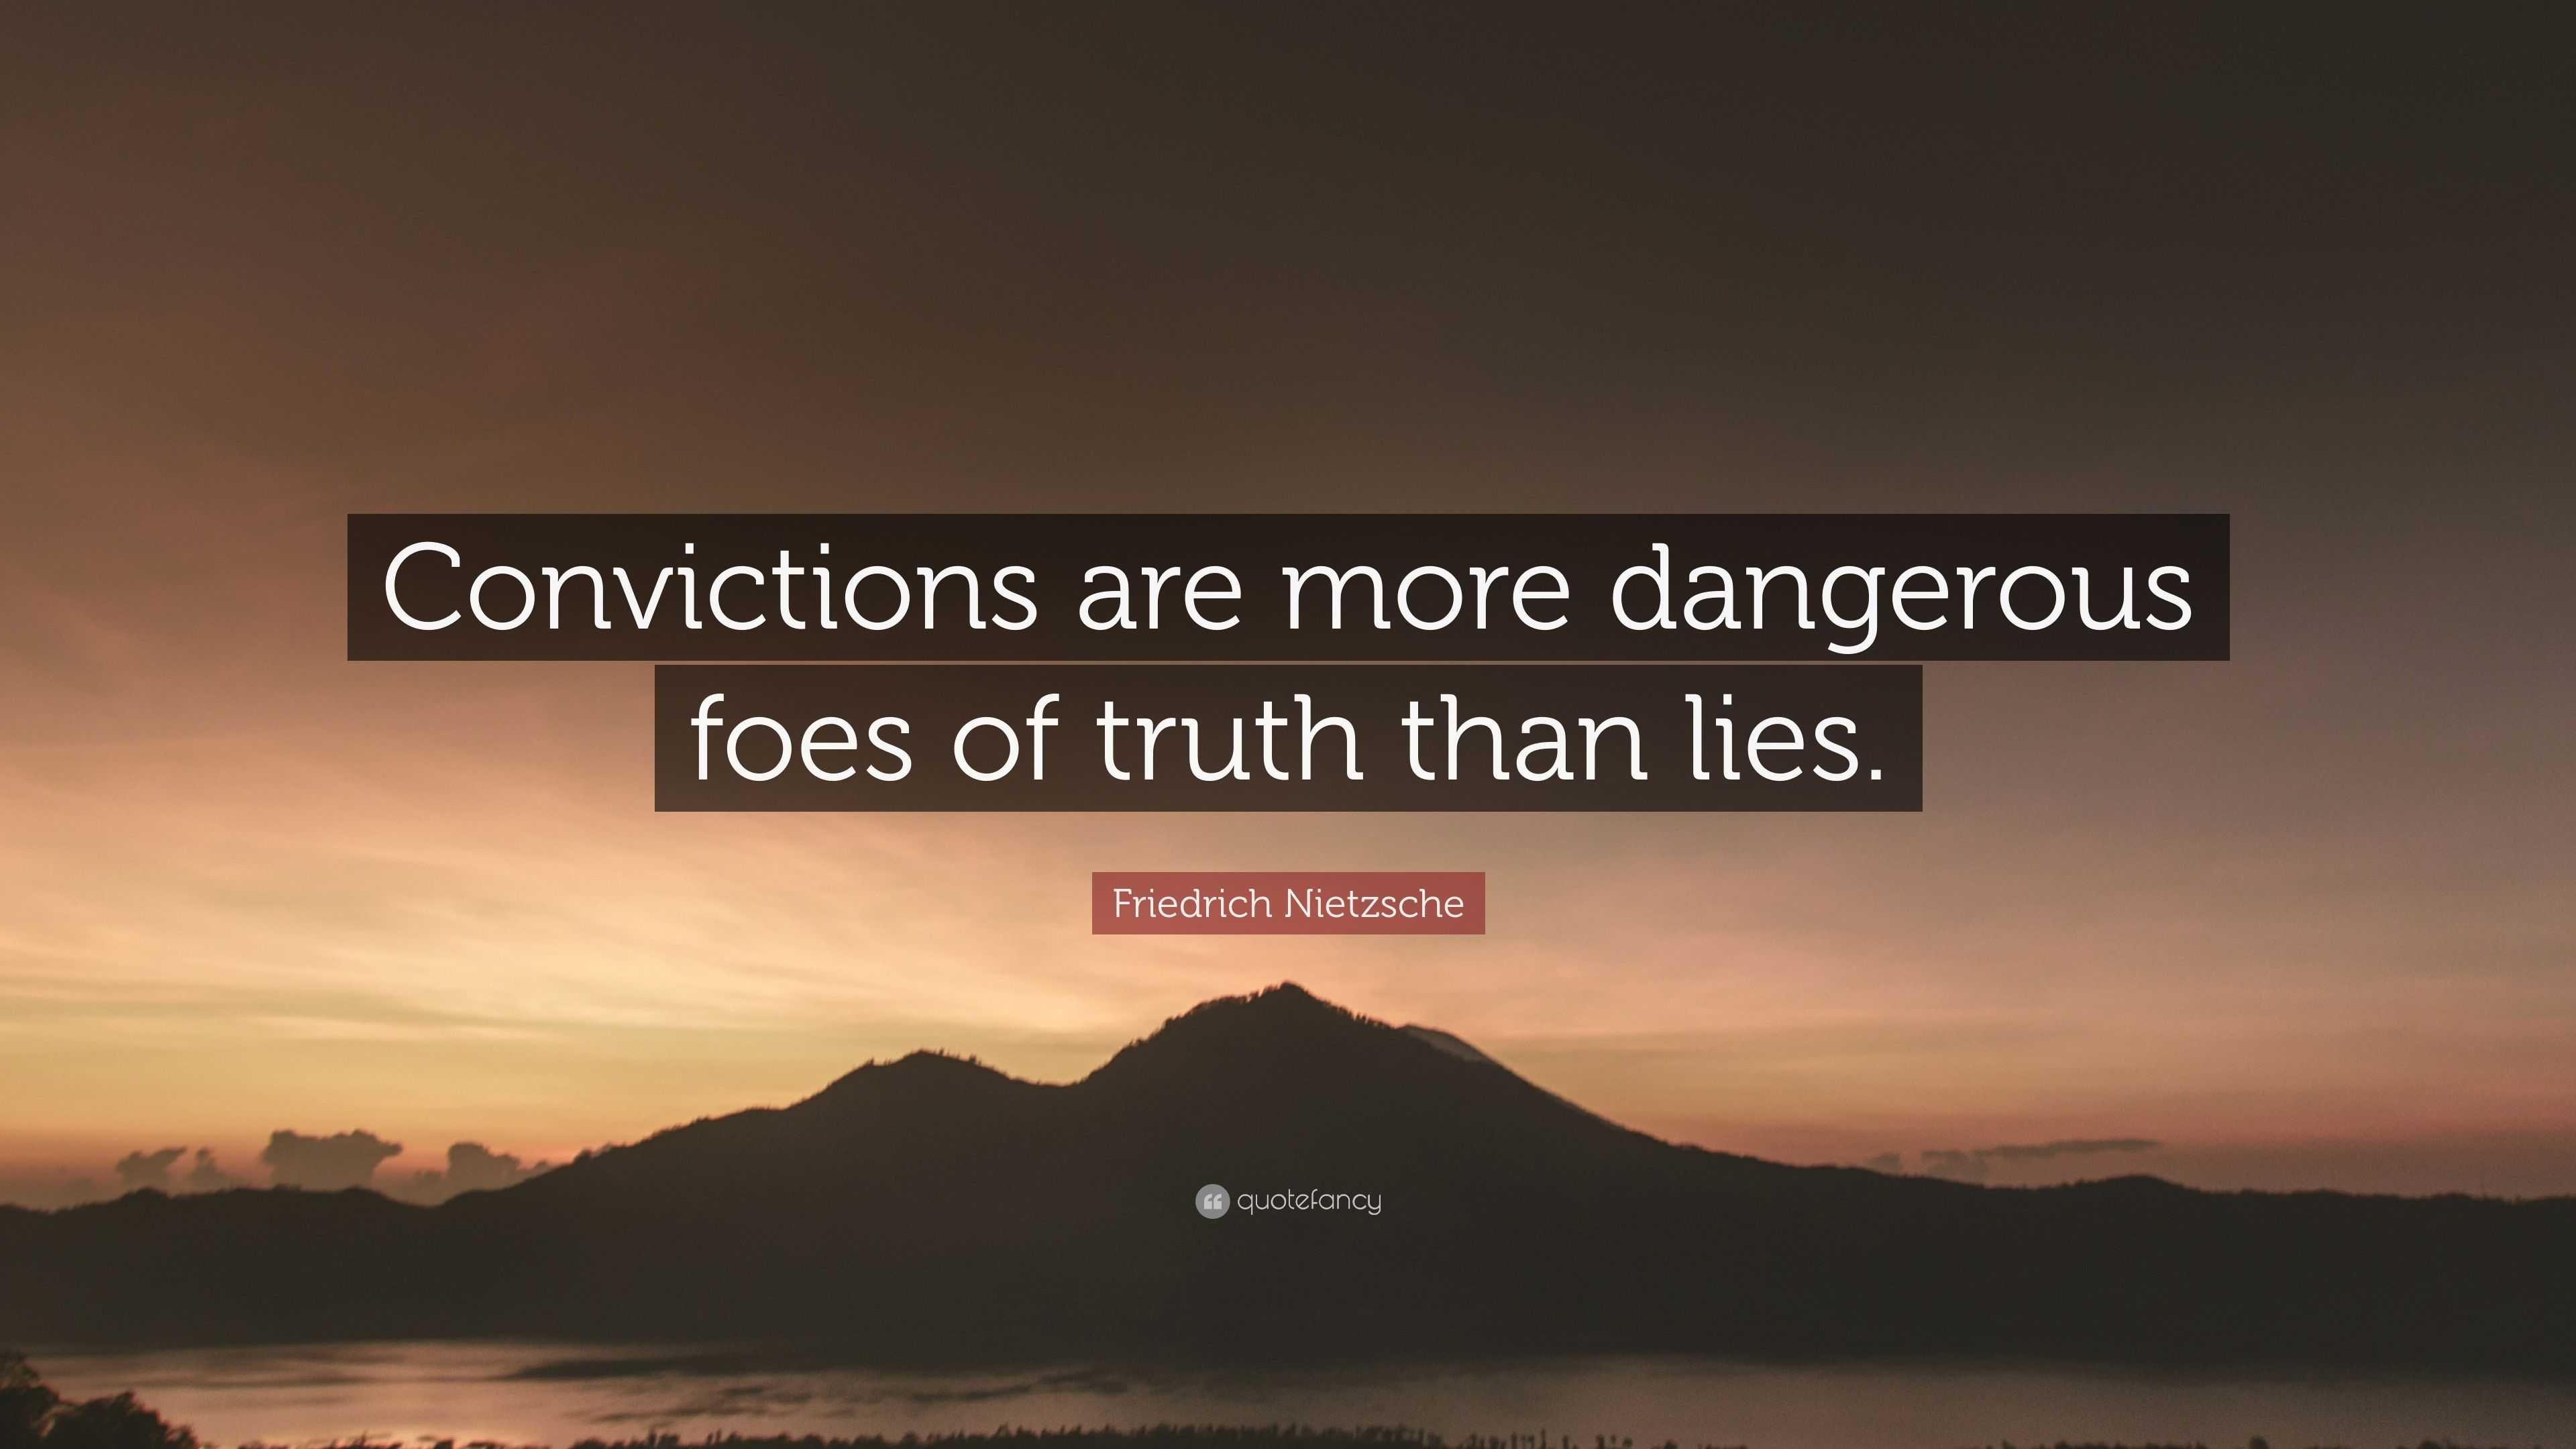 Friedrich Nietzsche Quote Convictions Are More Dangerous Foes Of Truth Than Lies